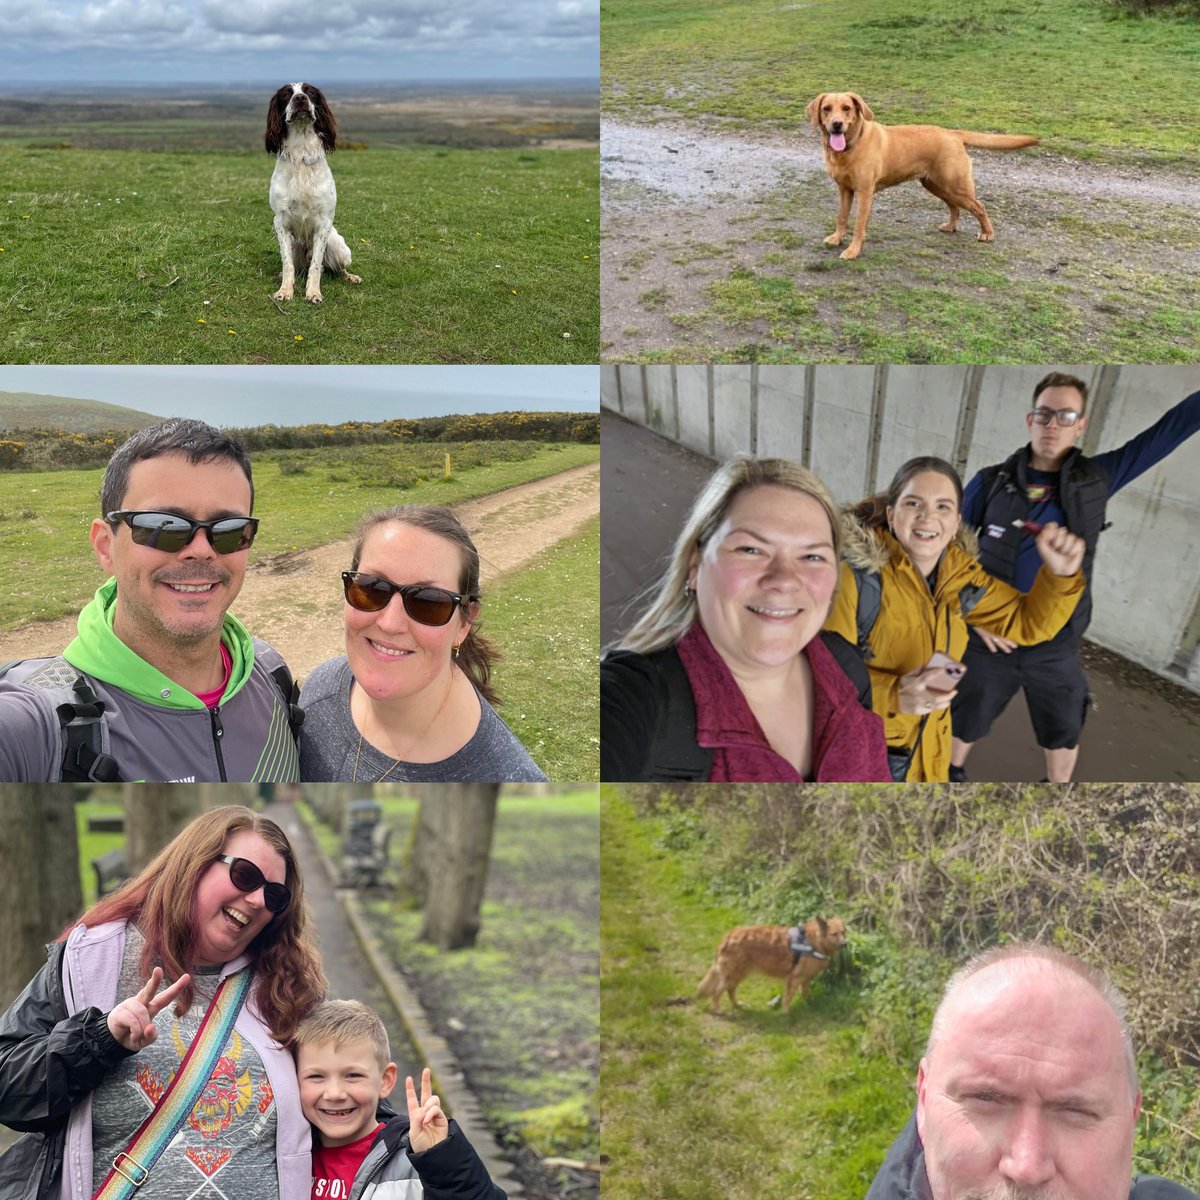 Our #MilesforSmiles challenge keeps getting better & better! 🎉 We've now raised over £3,500 & covered over 5,500 miles for our amazing charity partner @MakeAWishUK! Here’s some images of our wonderful colleagues (& wonderful pets!) embarking on their walks, runs & cycles. 💙